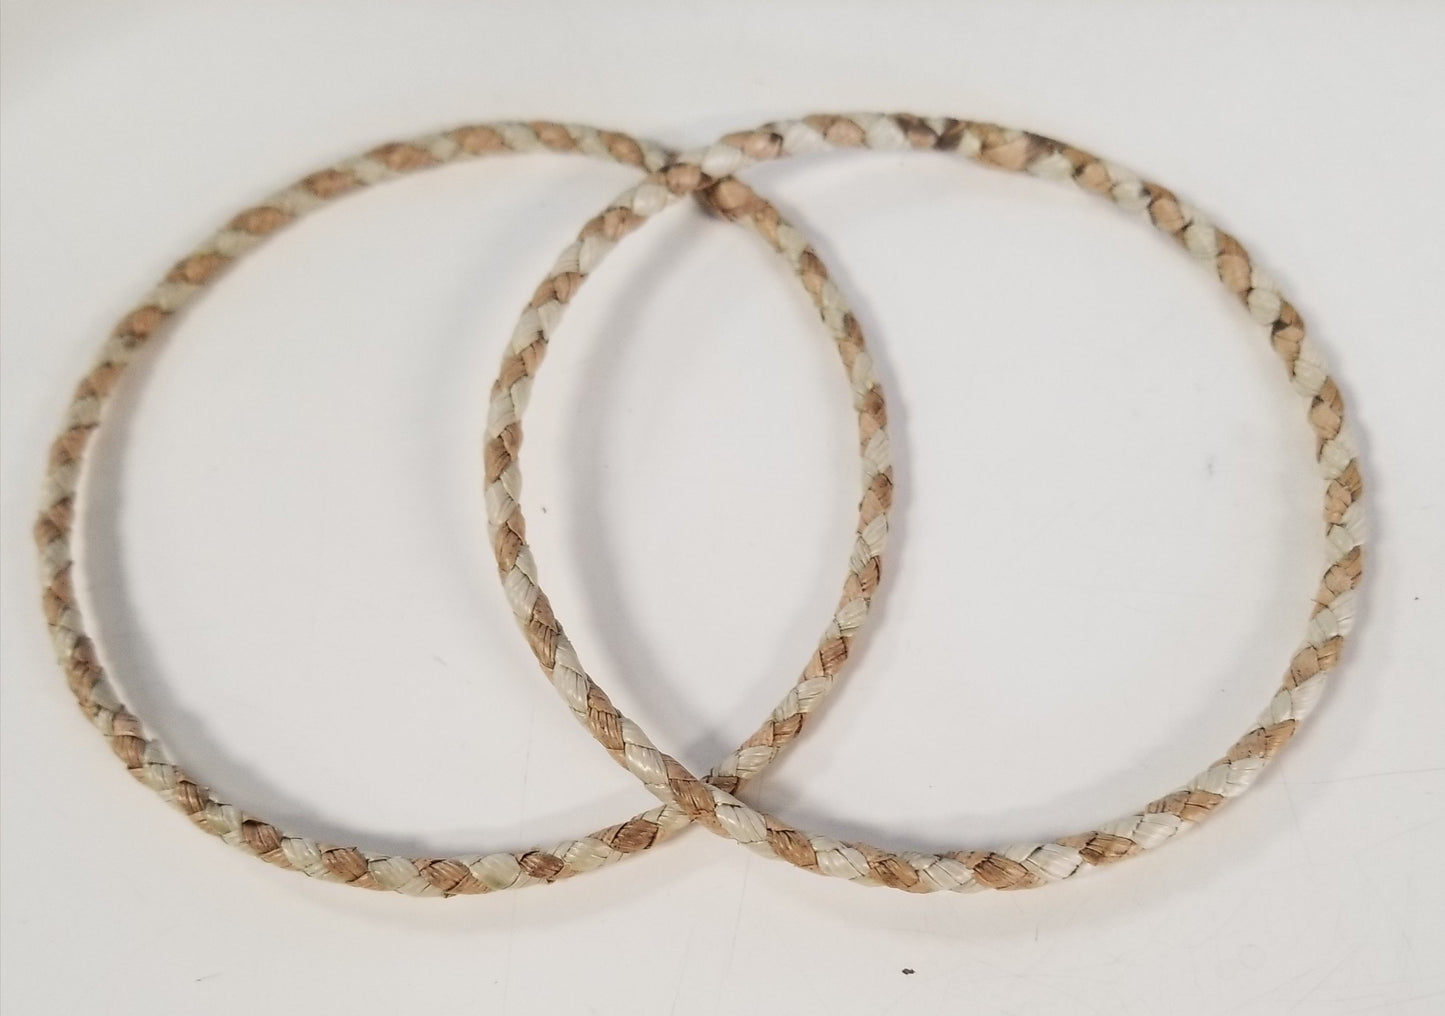 Handcrafted Small Extra Thin Striped Weave Lauhala Bracelet